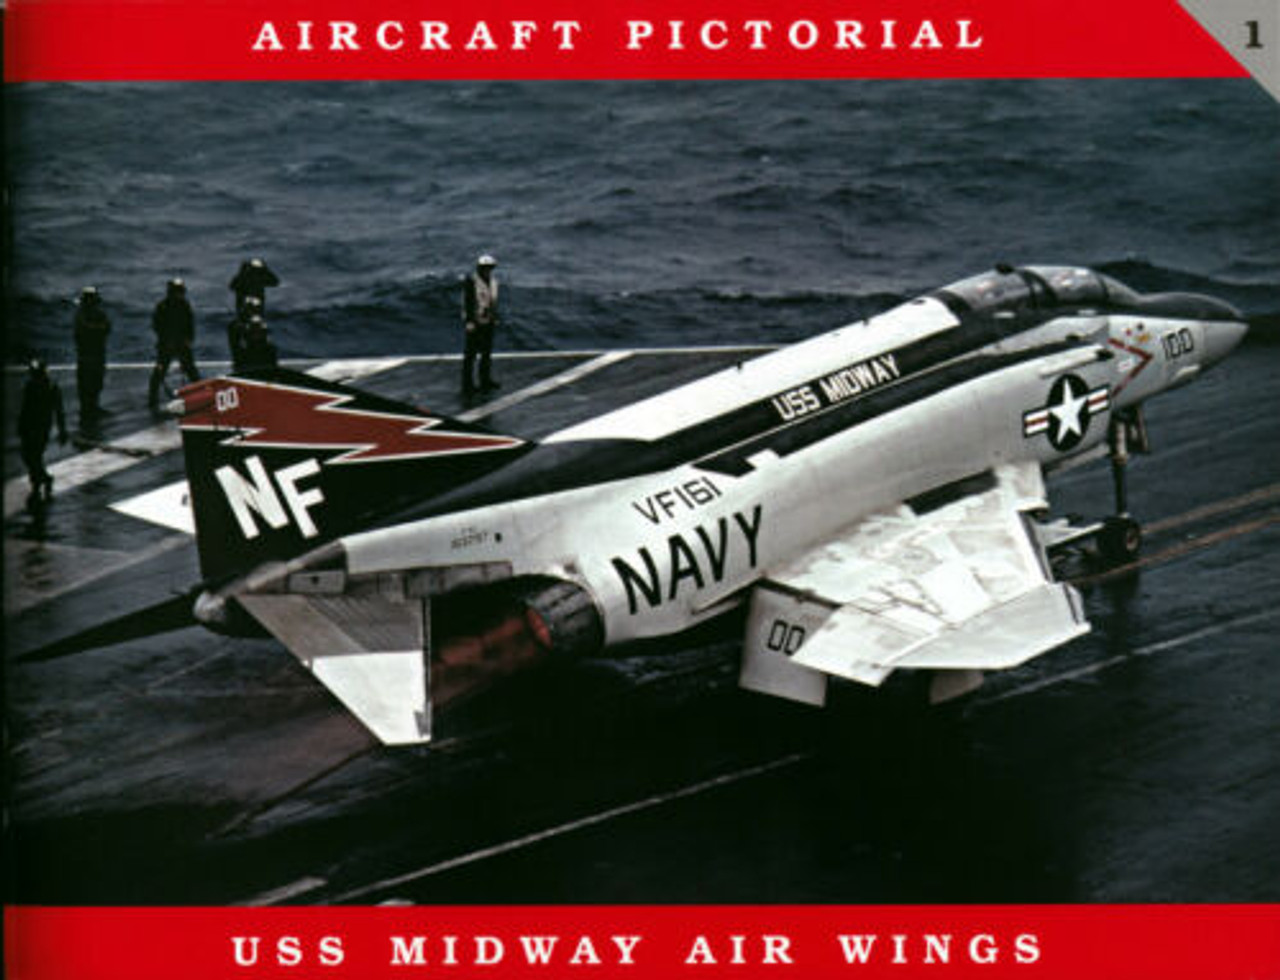 Aircraft Pictorial #01 - USS Midway Air Wings